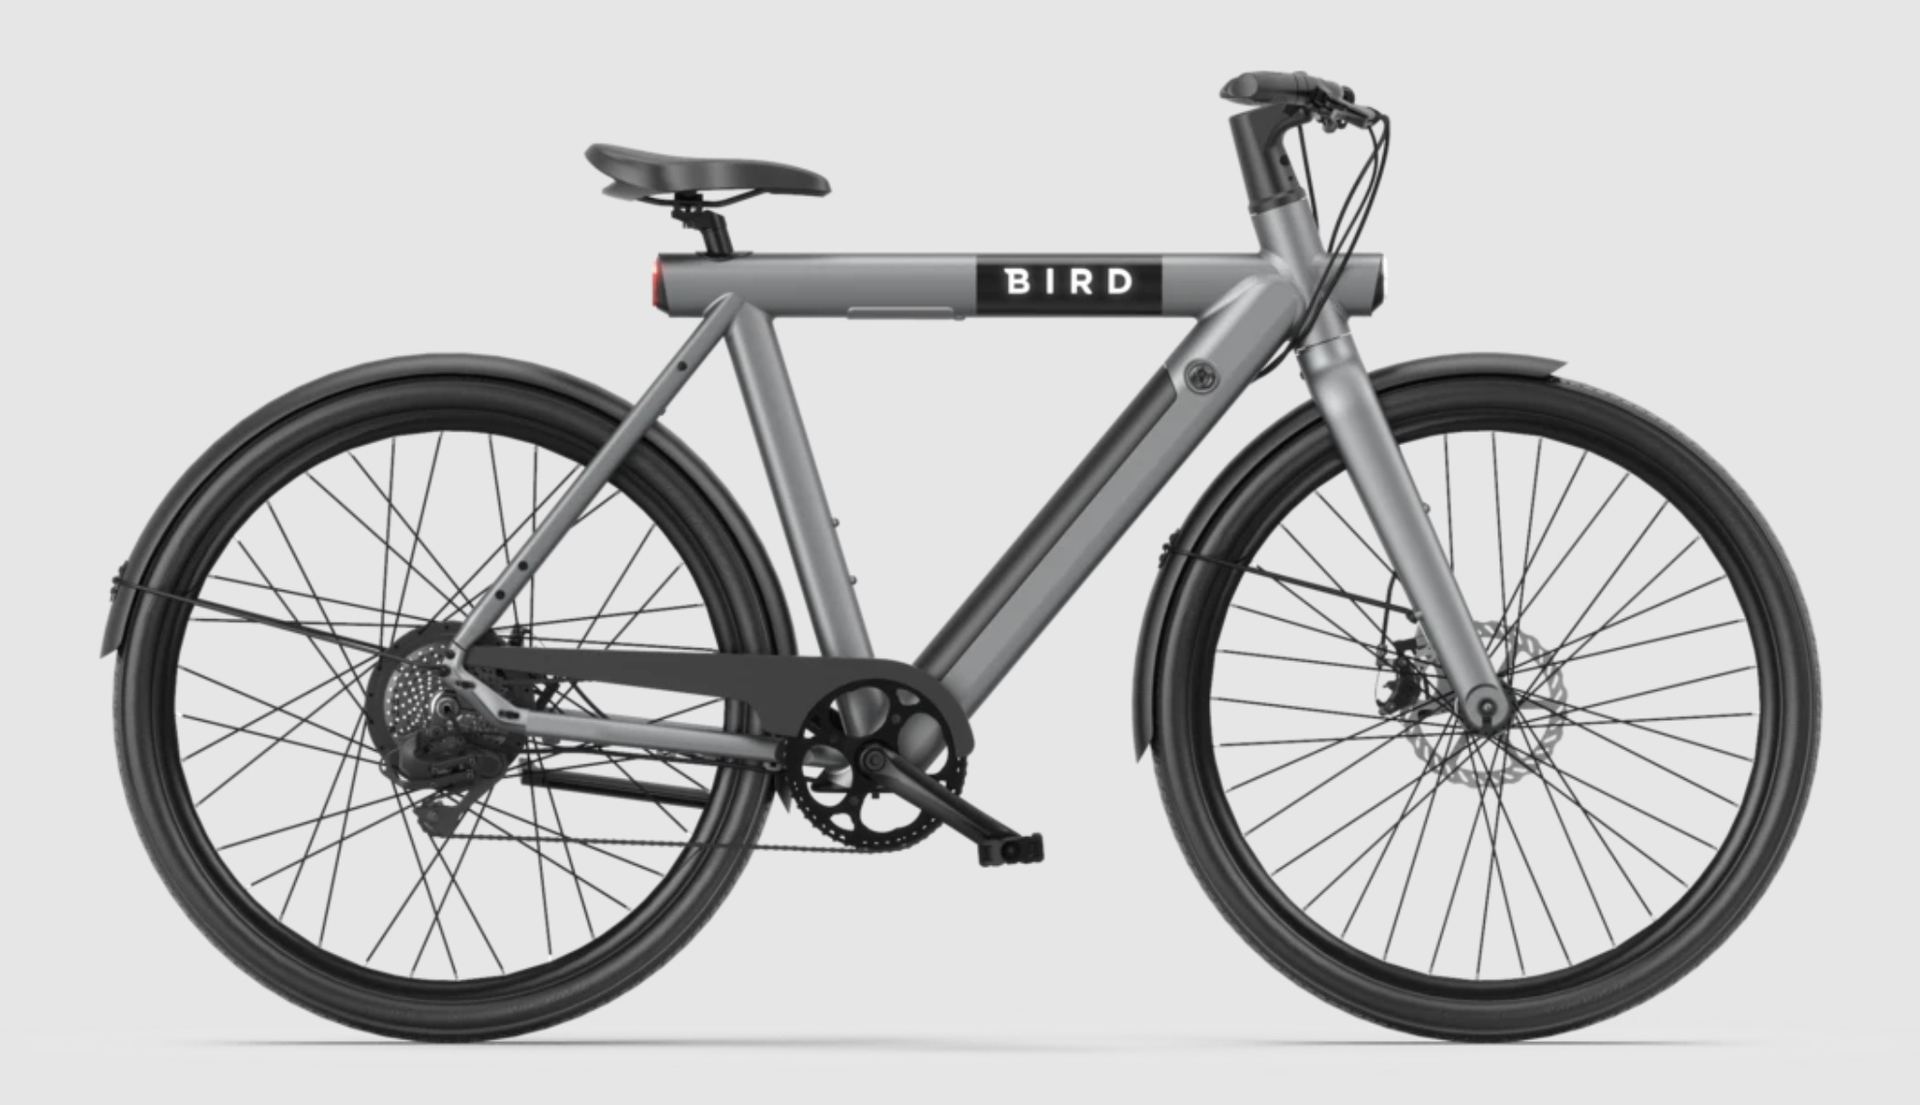 Bird is expanding its business strategy with a cheap e-bike | Electric ...